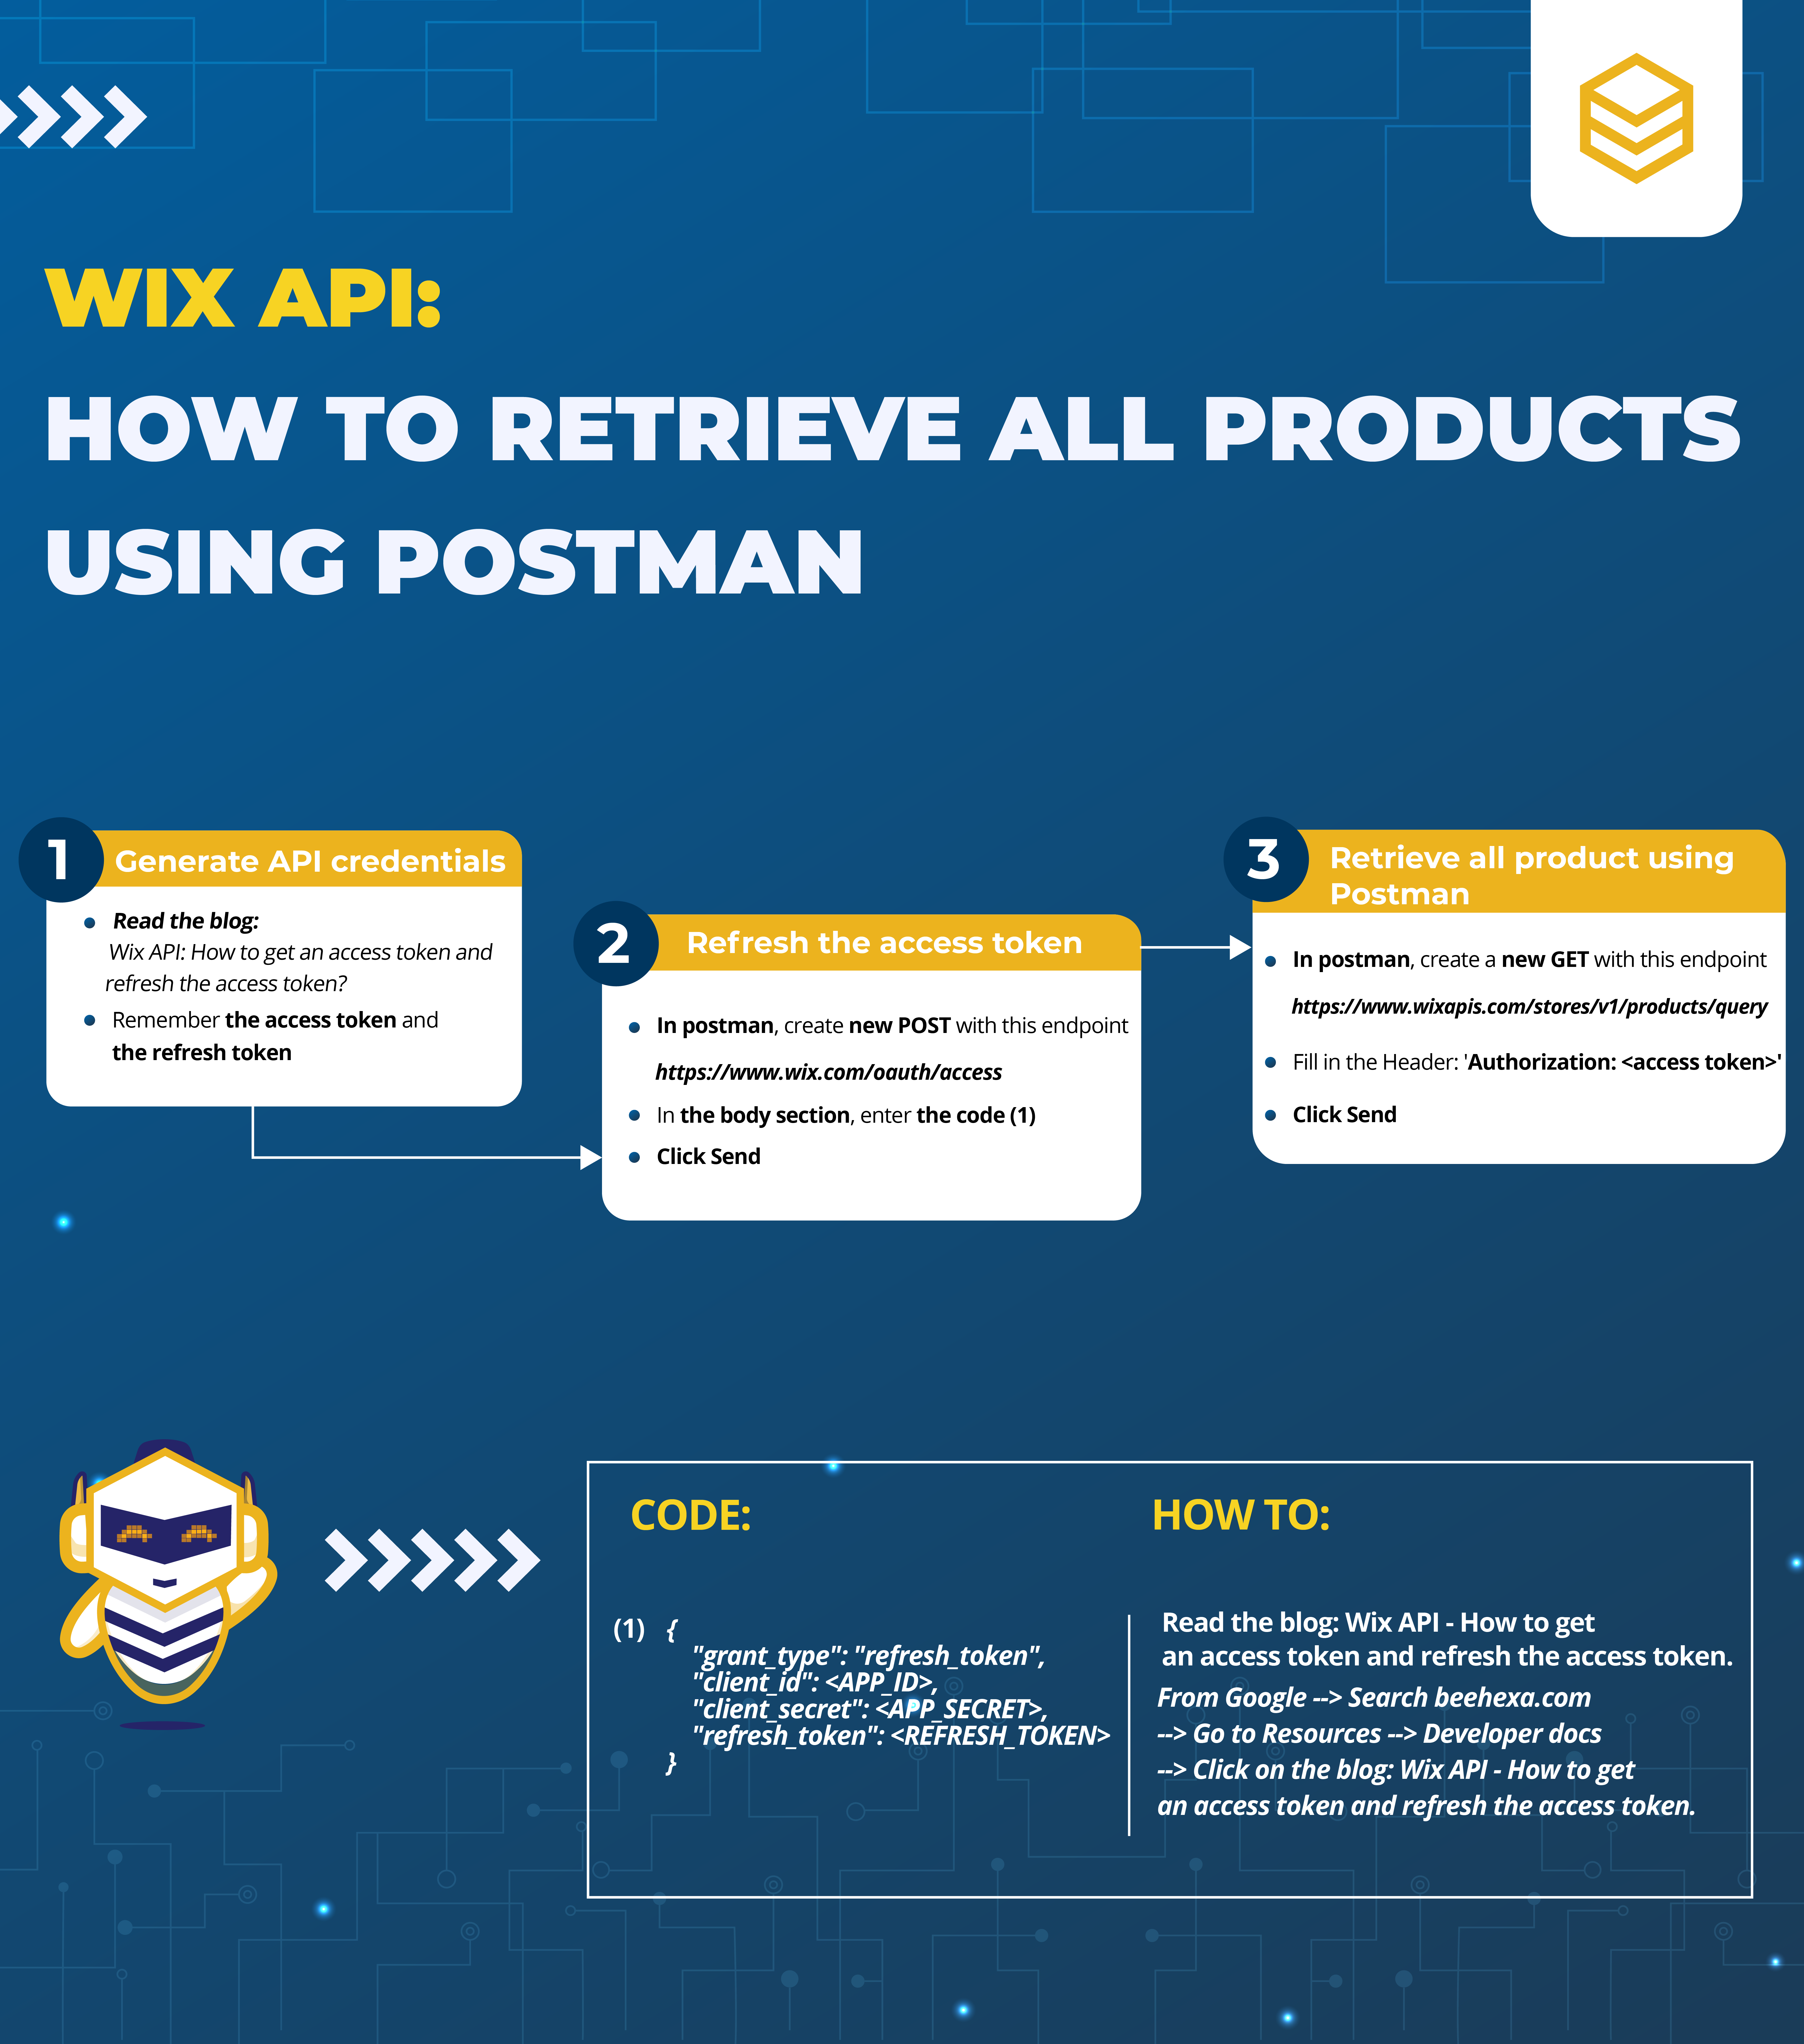 How to retrieve all products using Postman in Wix API?